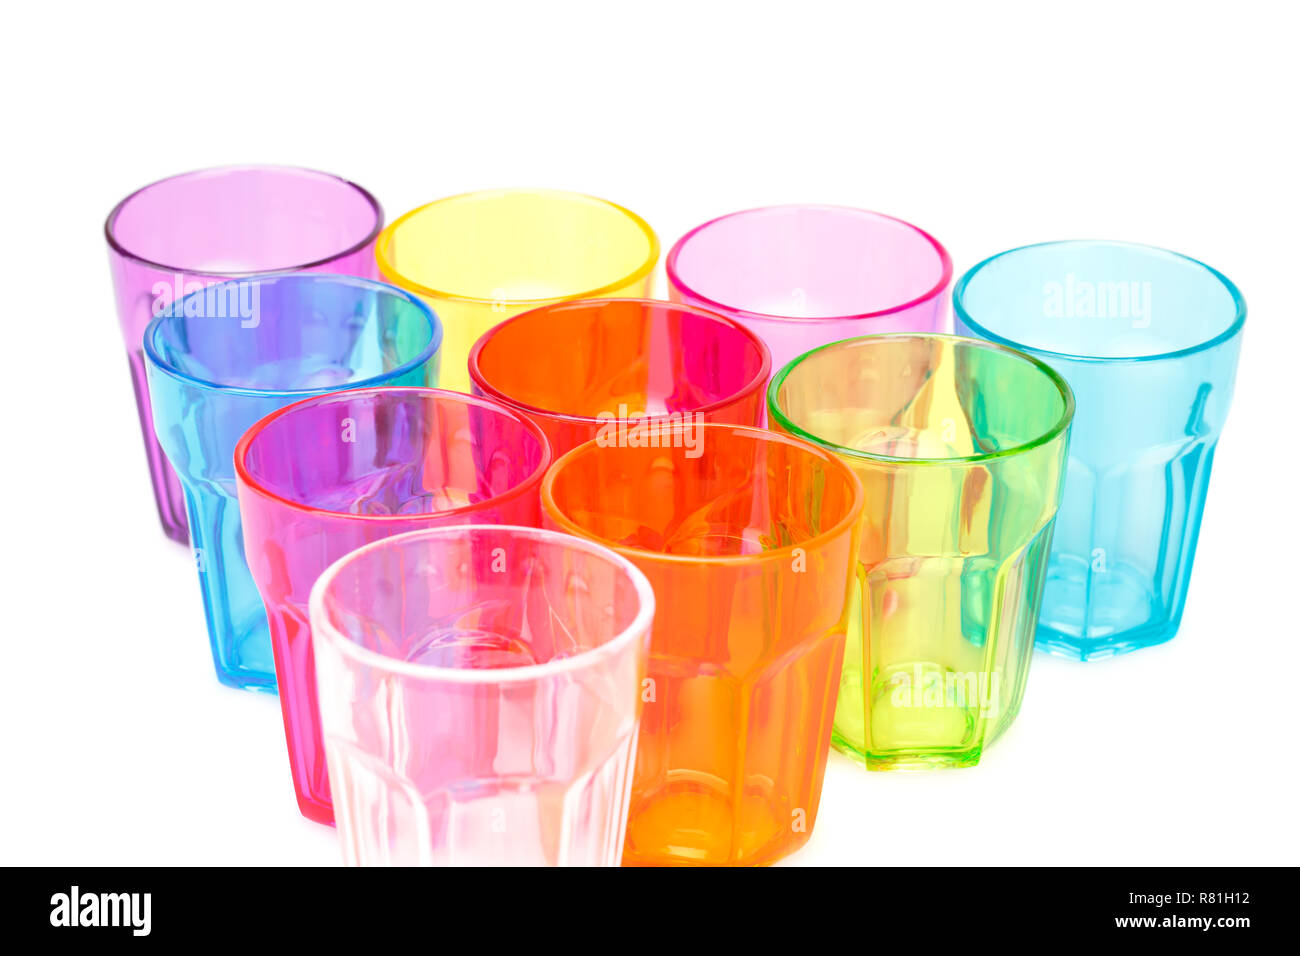 Colorful plastic glasses on white background. Stock Photo